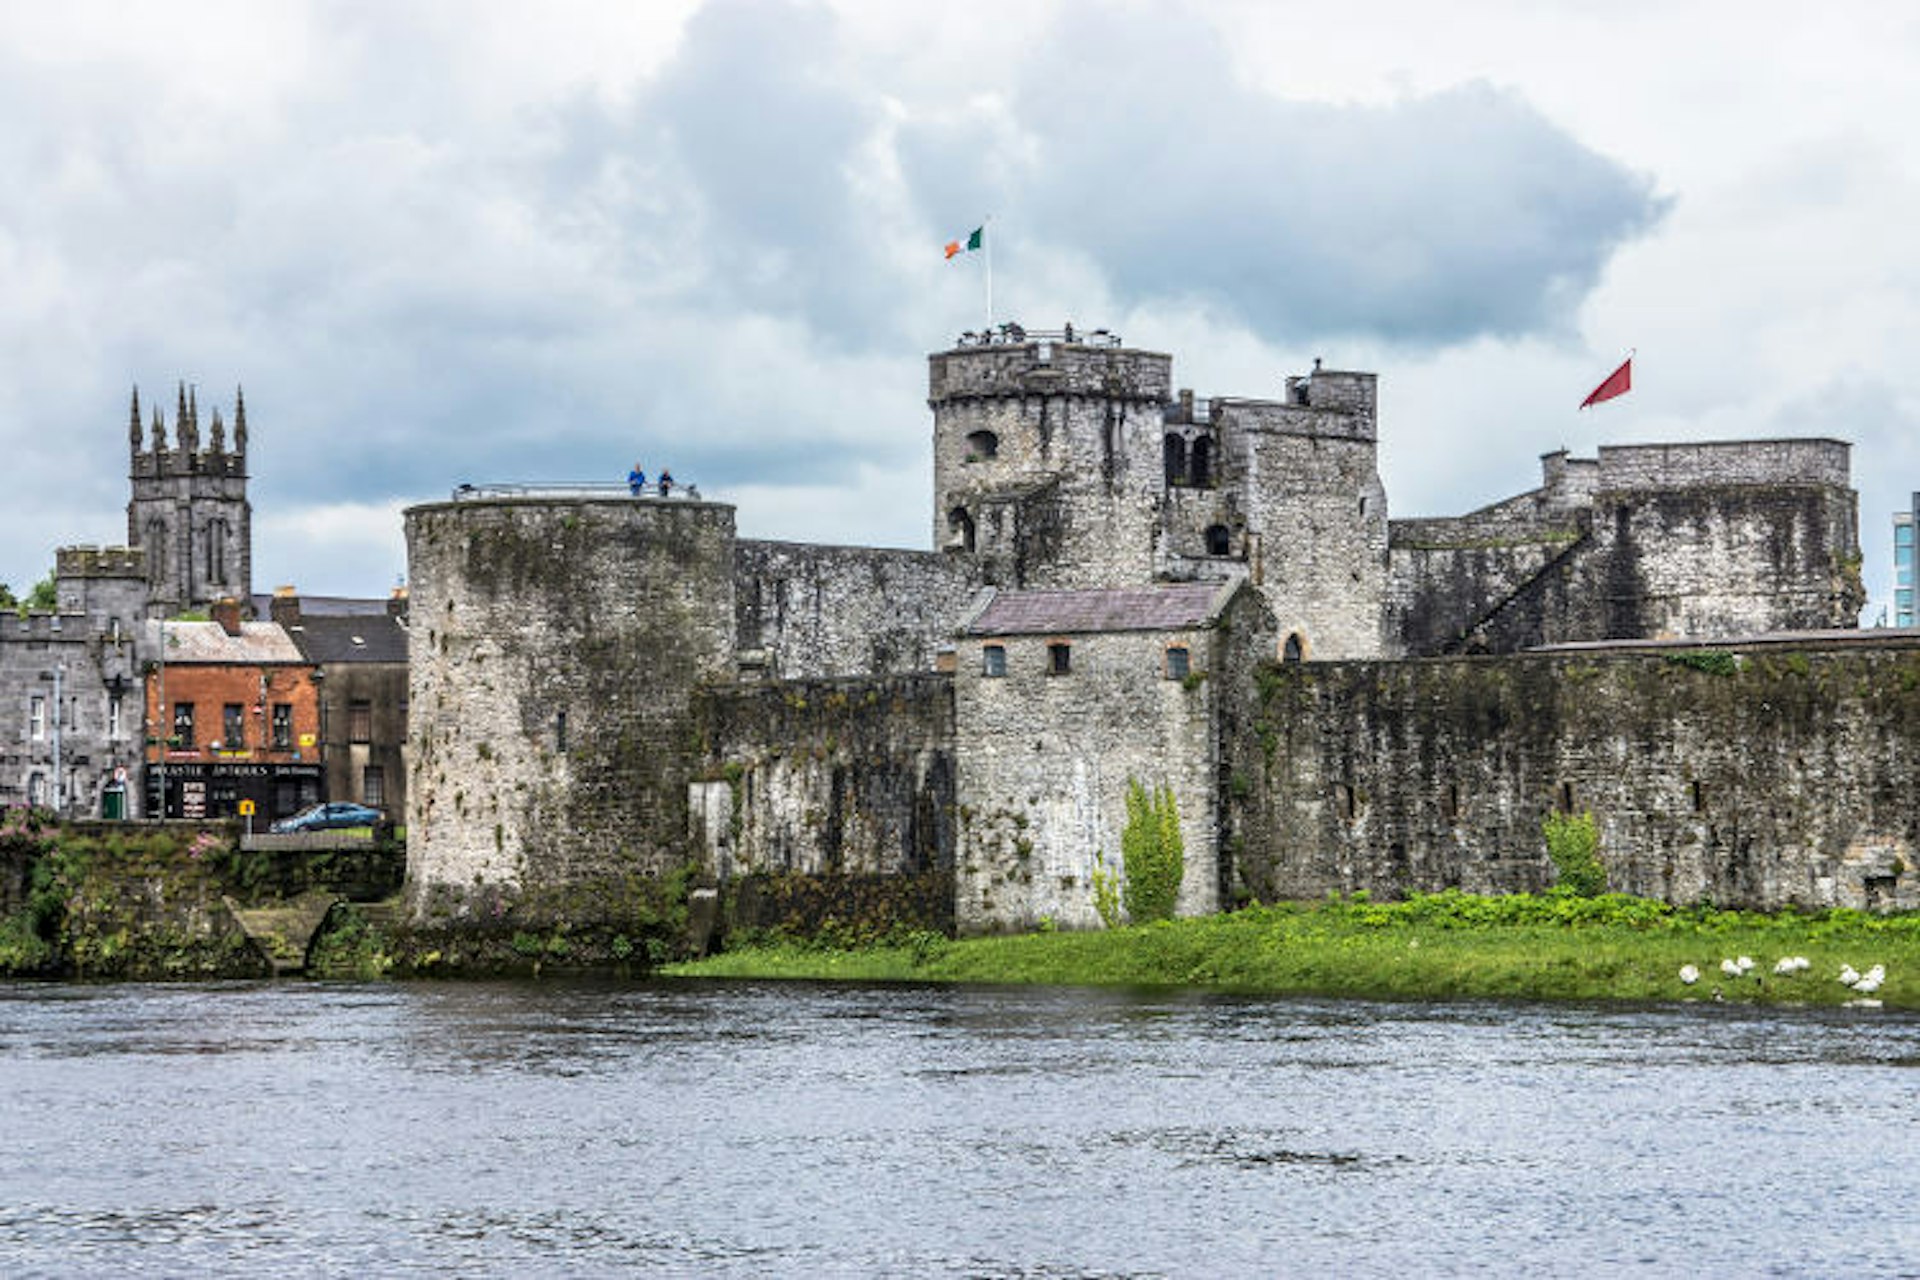 King John's Castle, Limerick. Image by William Murphy / CC BY-SA 2.0